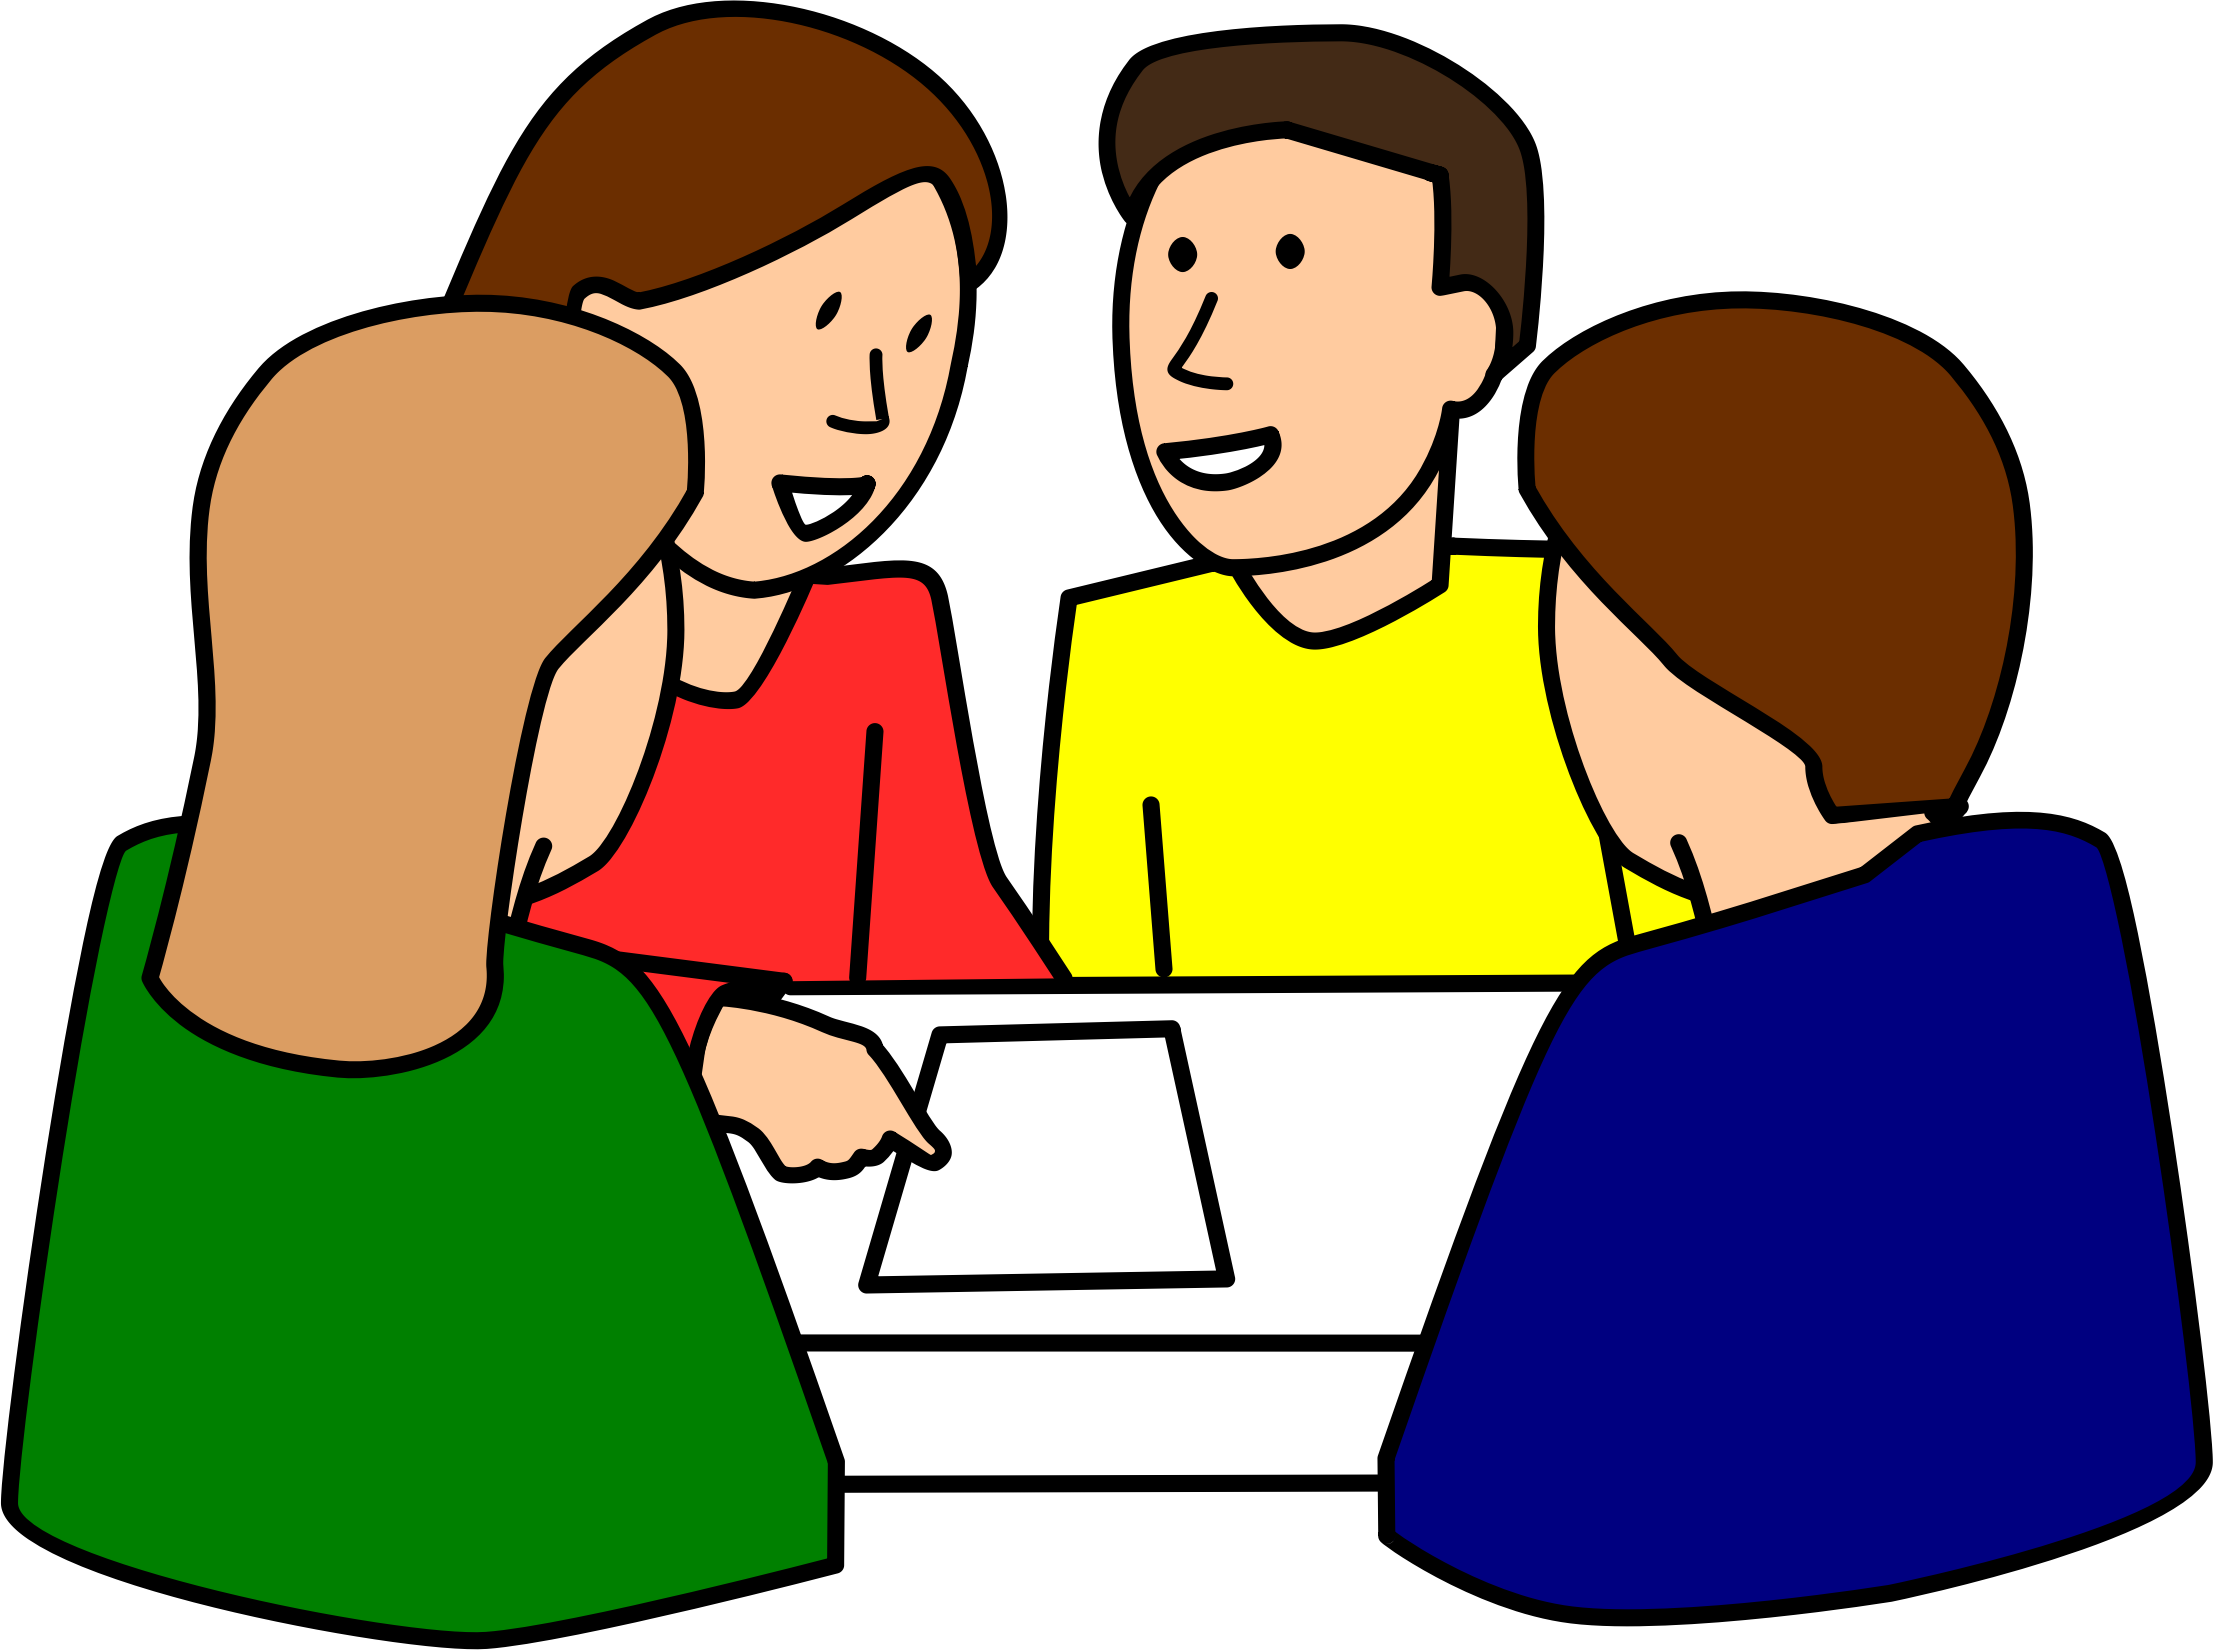 Big Image (Png) - Group Work, Transparent background PNG HD thumbnail